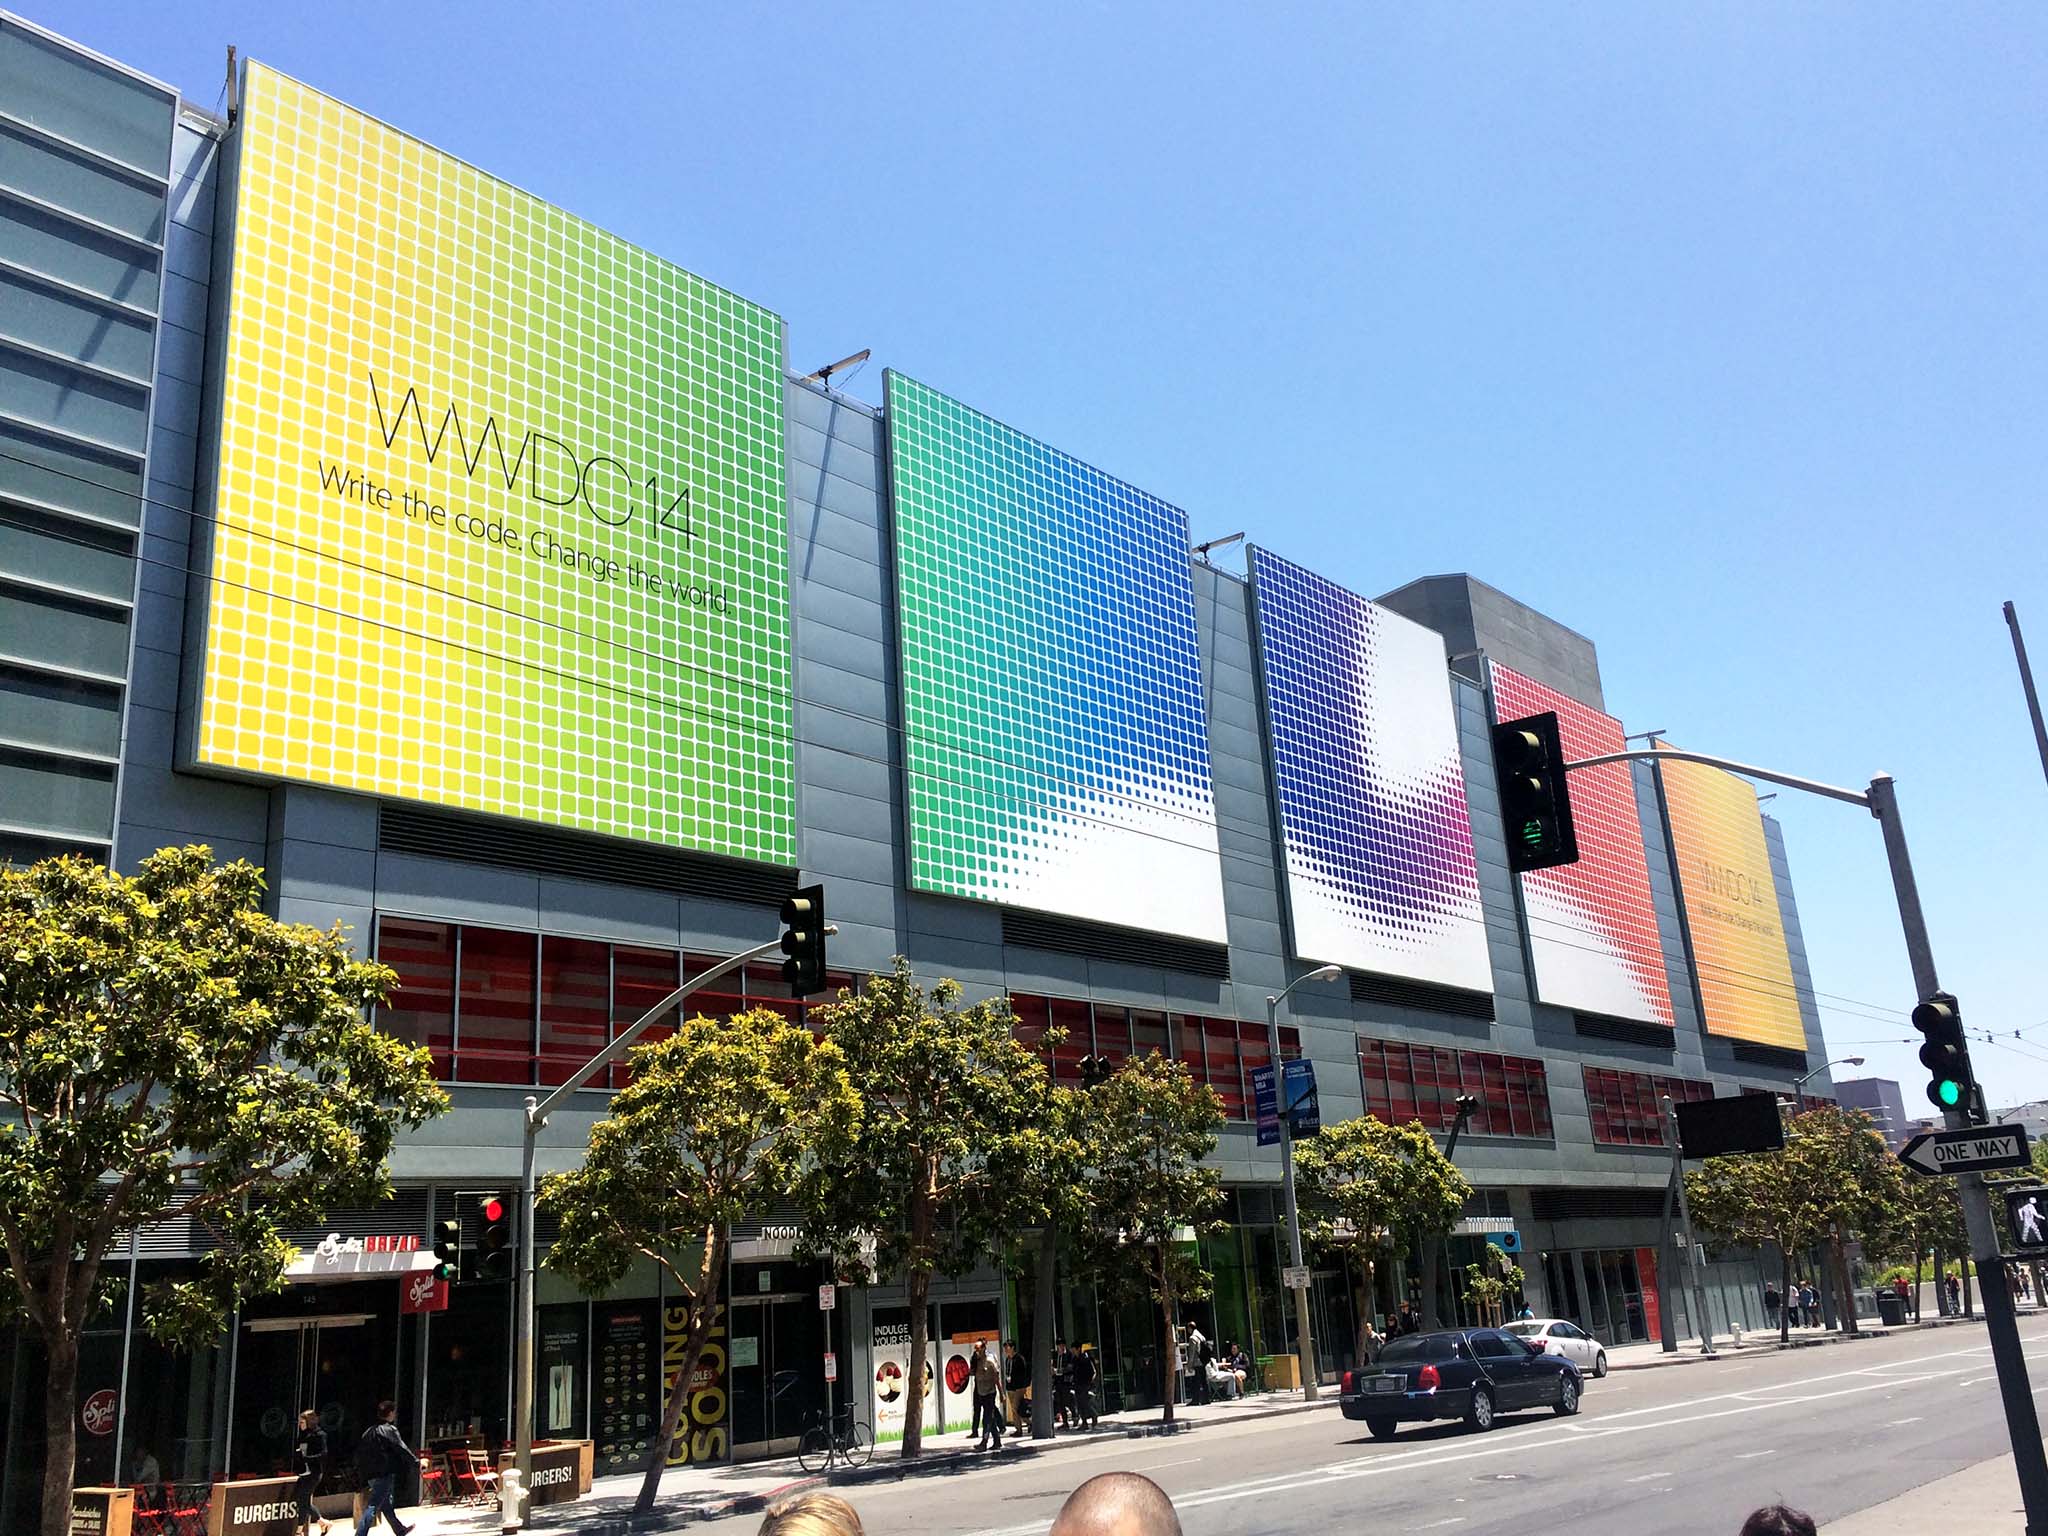 Apple schedules WWDC 2014 Keynote for Monday June 2, 10am PT